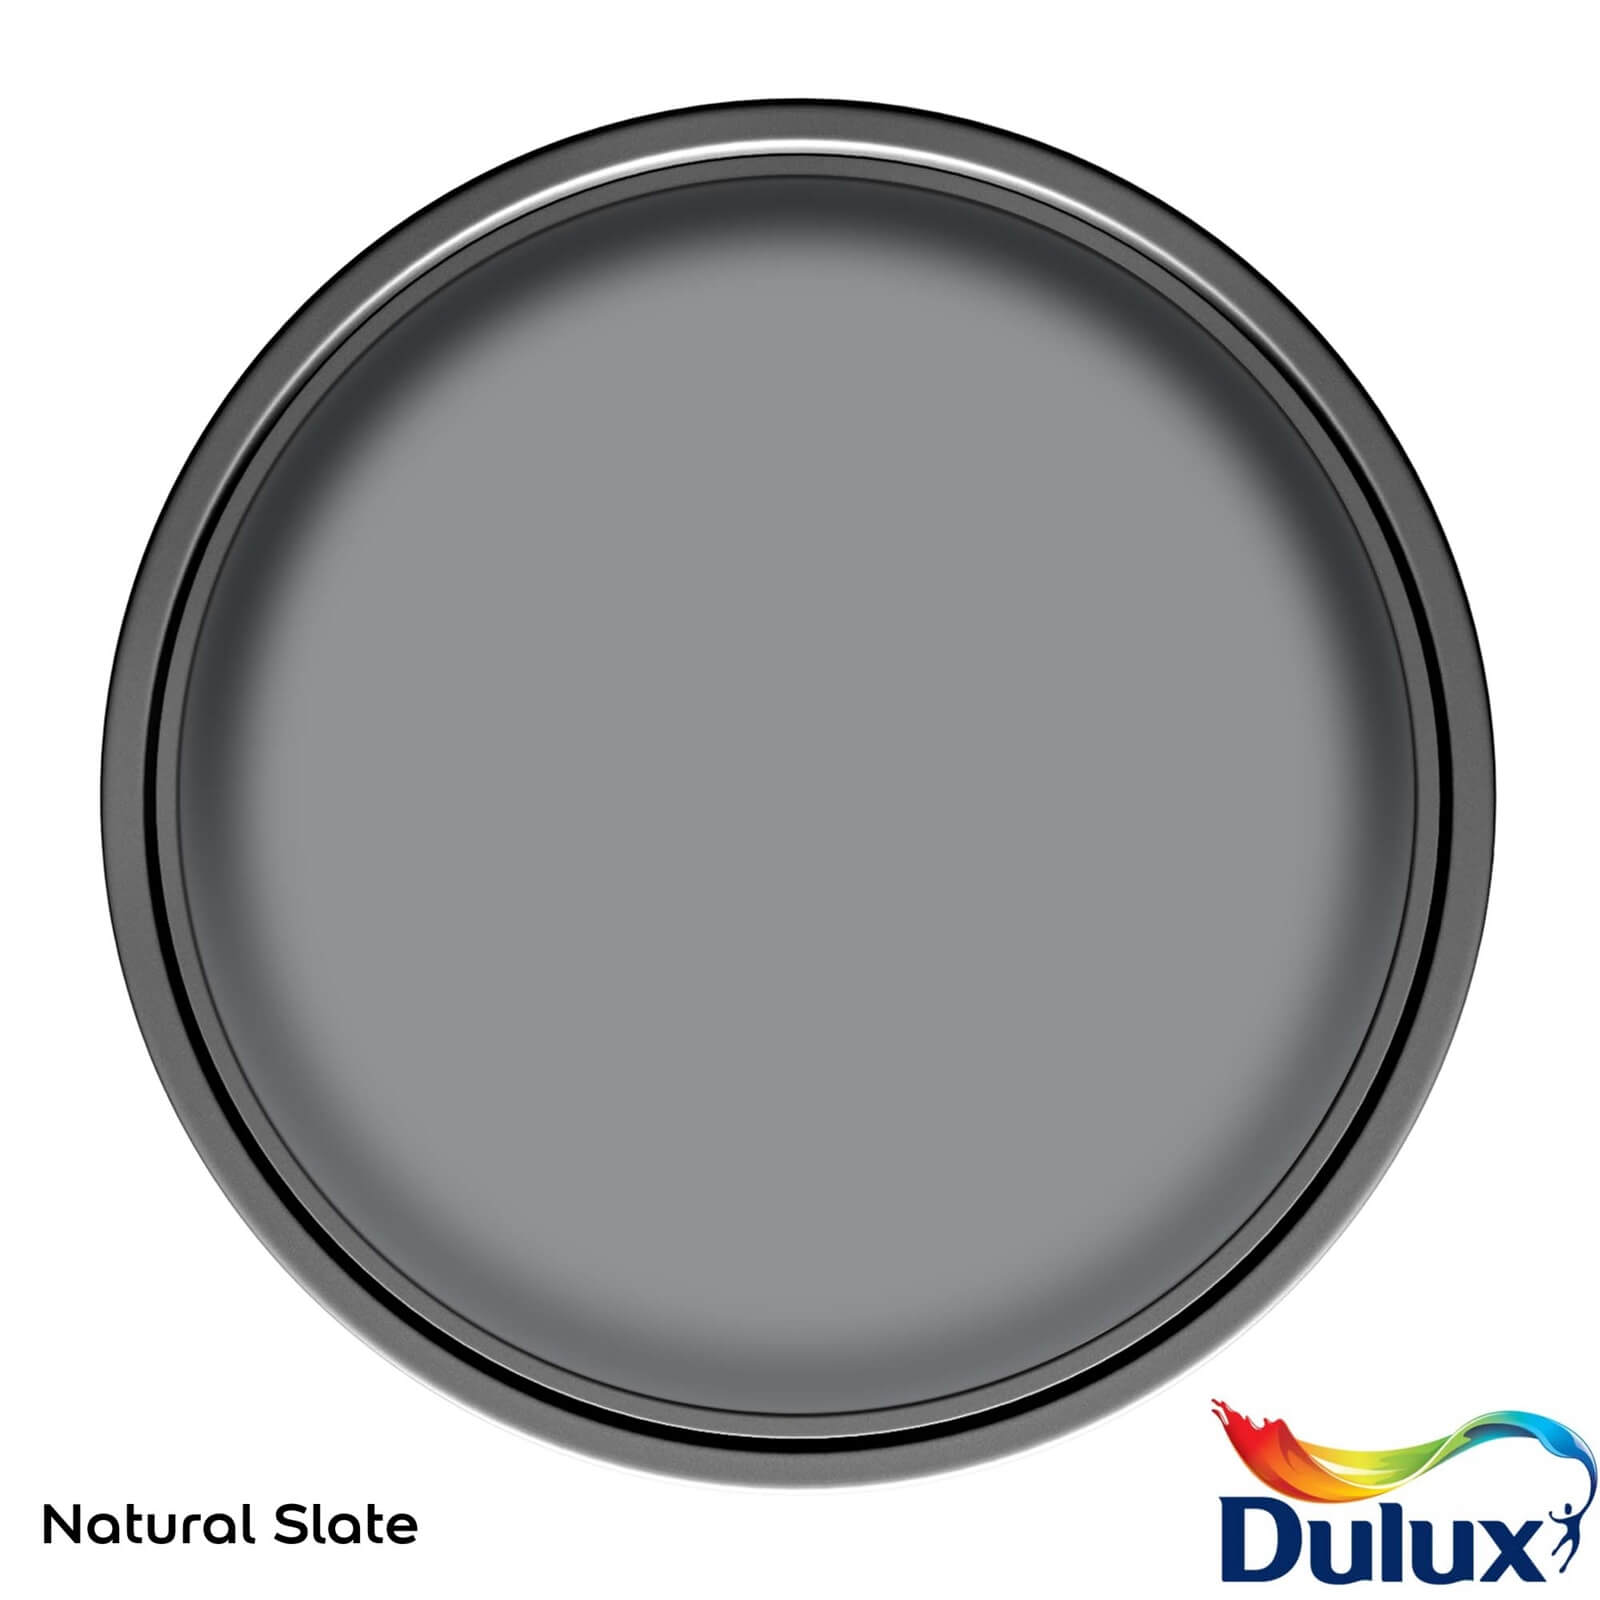 Dulux Quick Dry Eggshell Paint Natural Slate - 750ml